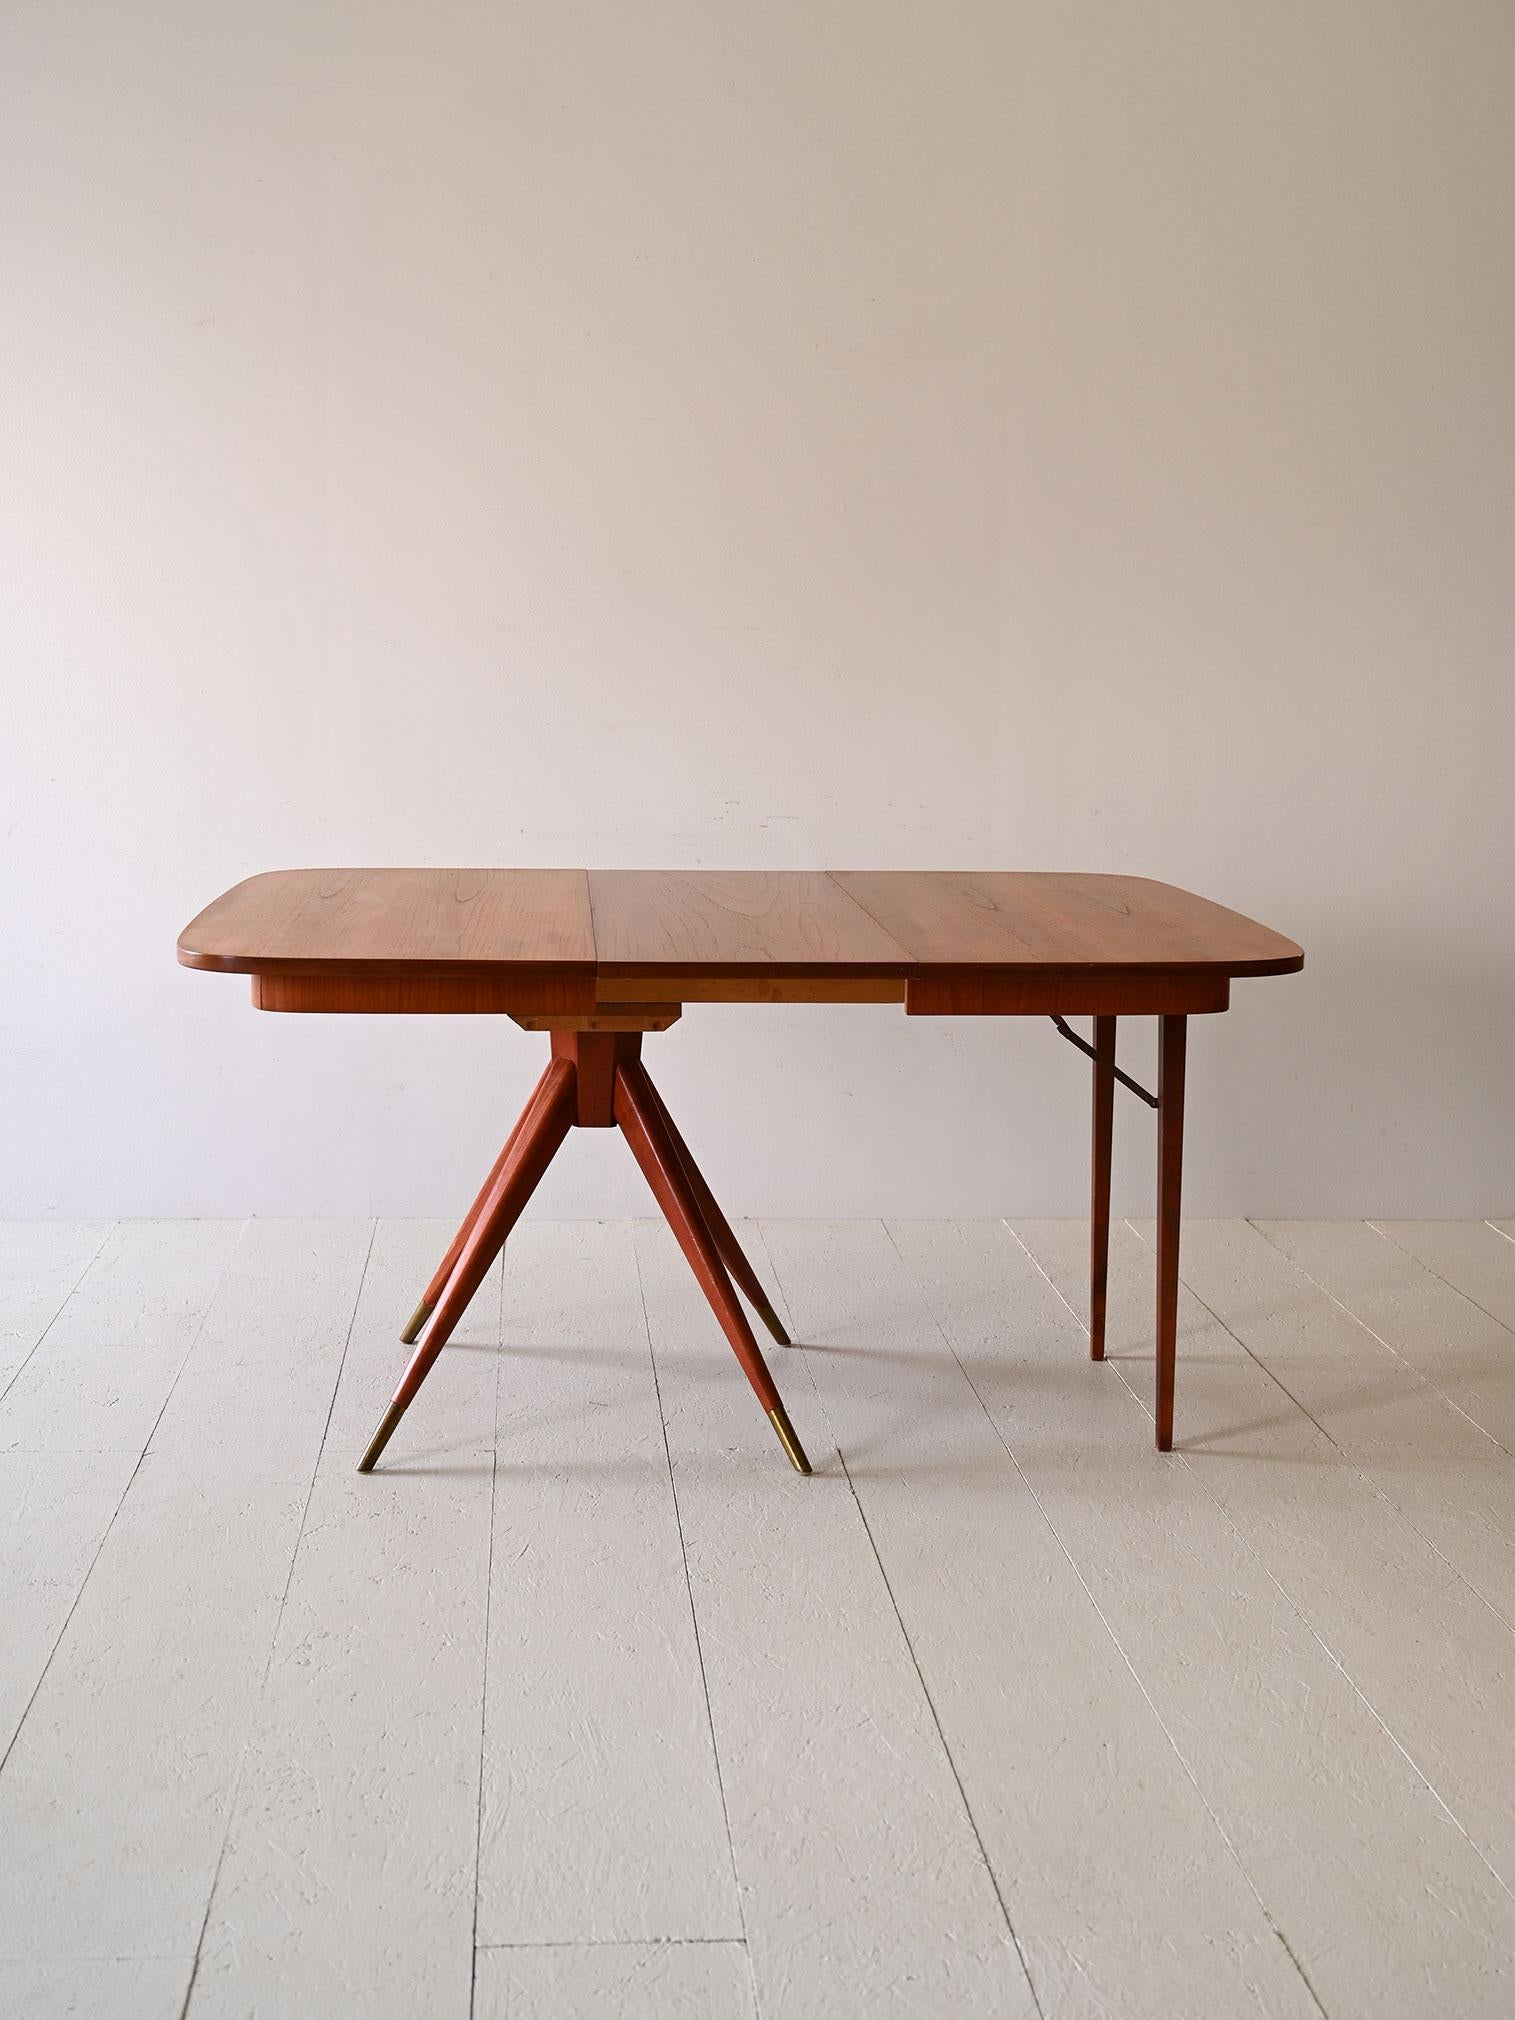 Mid-20th Century Square table with rounded corners